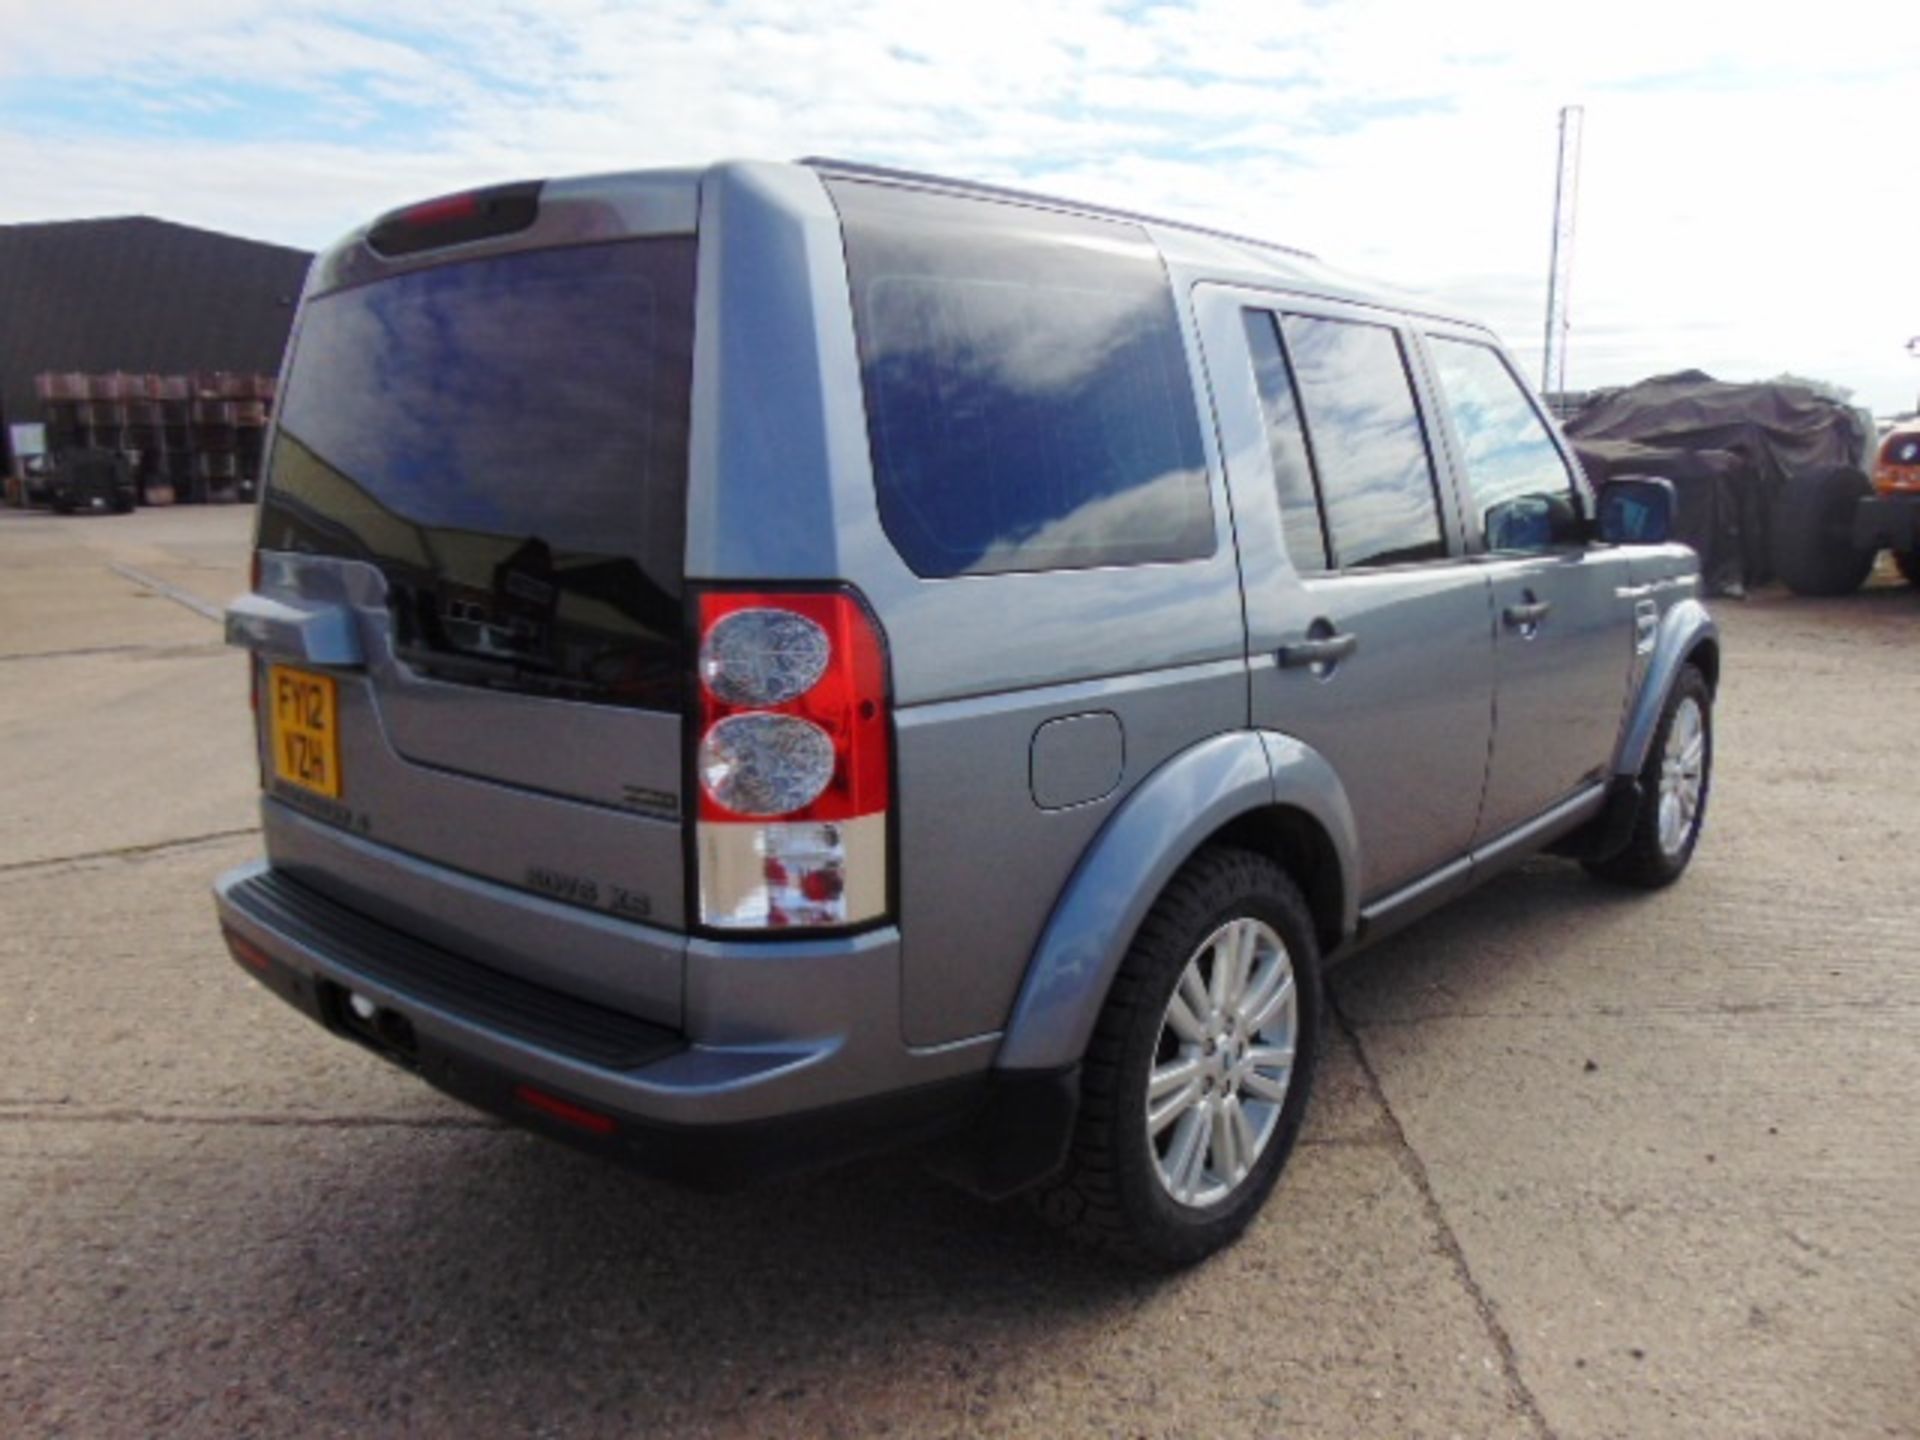 2012 Land Rover Discovery 4 3.0 SDV6 XS 7 Seat Auto - Image 7 of 29